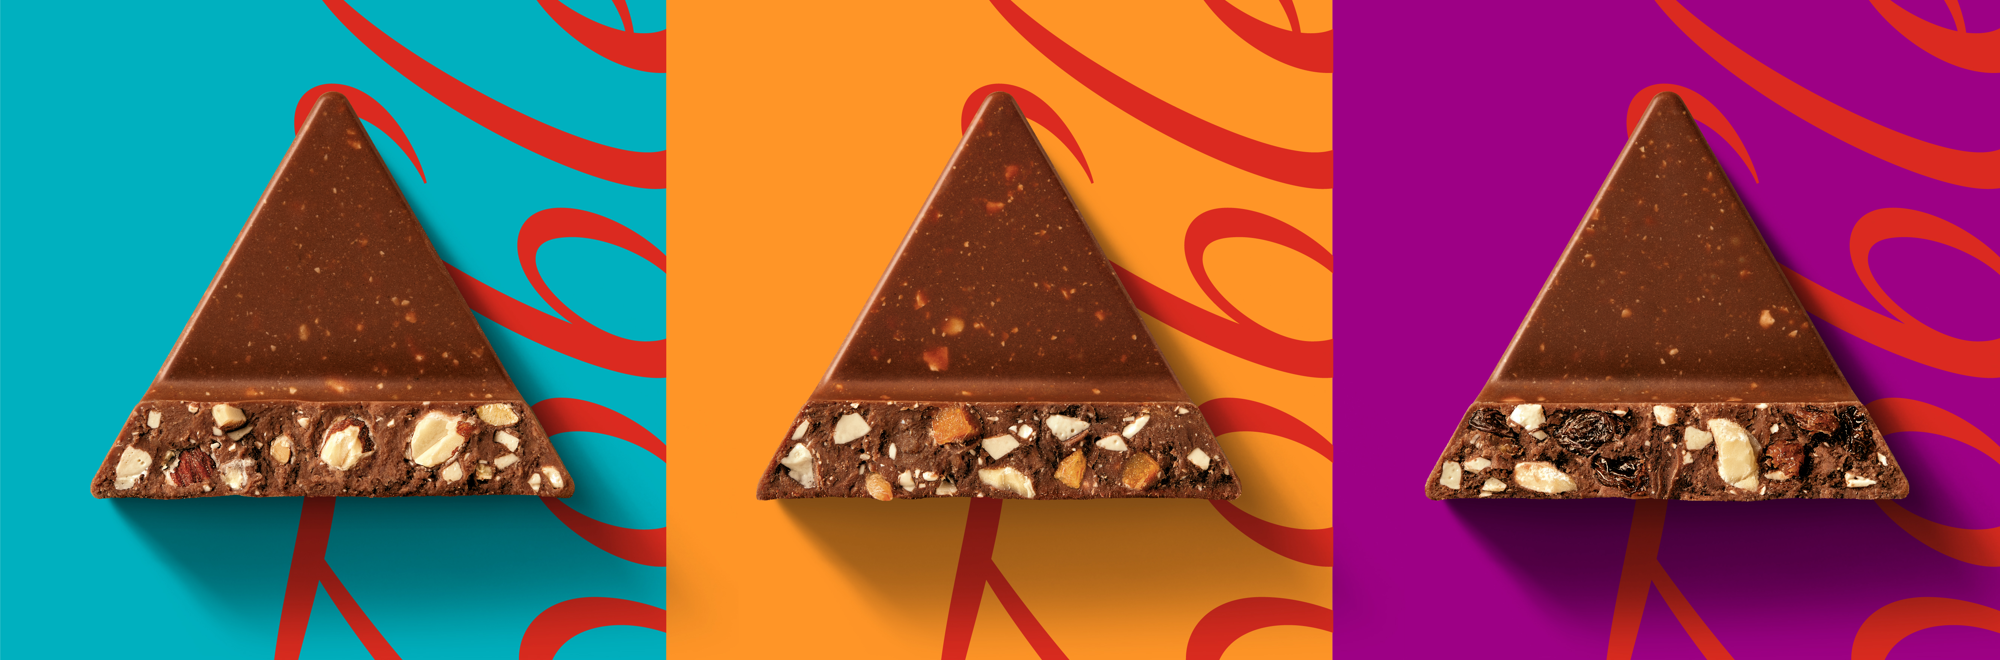 Toblerone celebrates all things triangle with new brand story